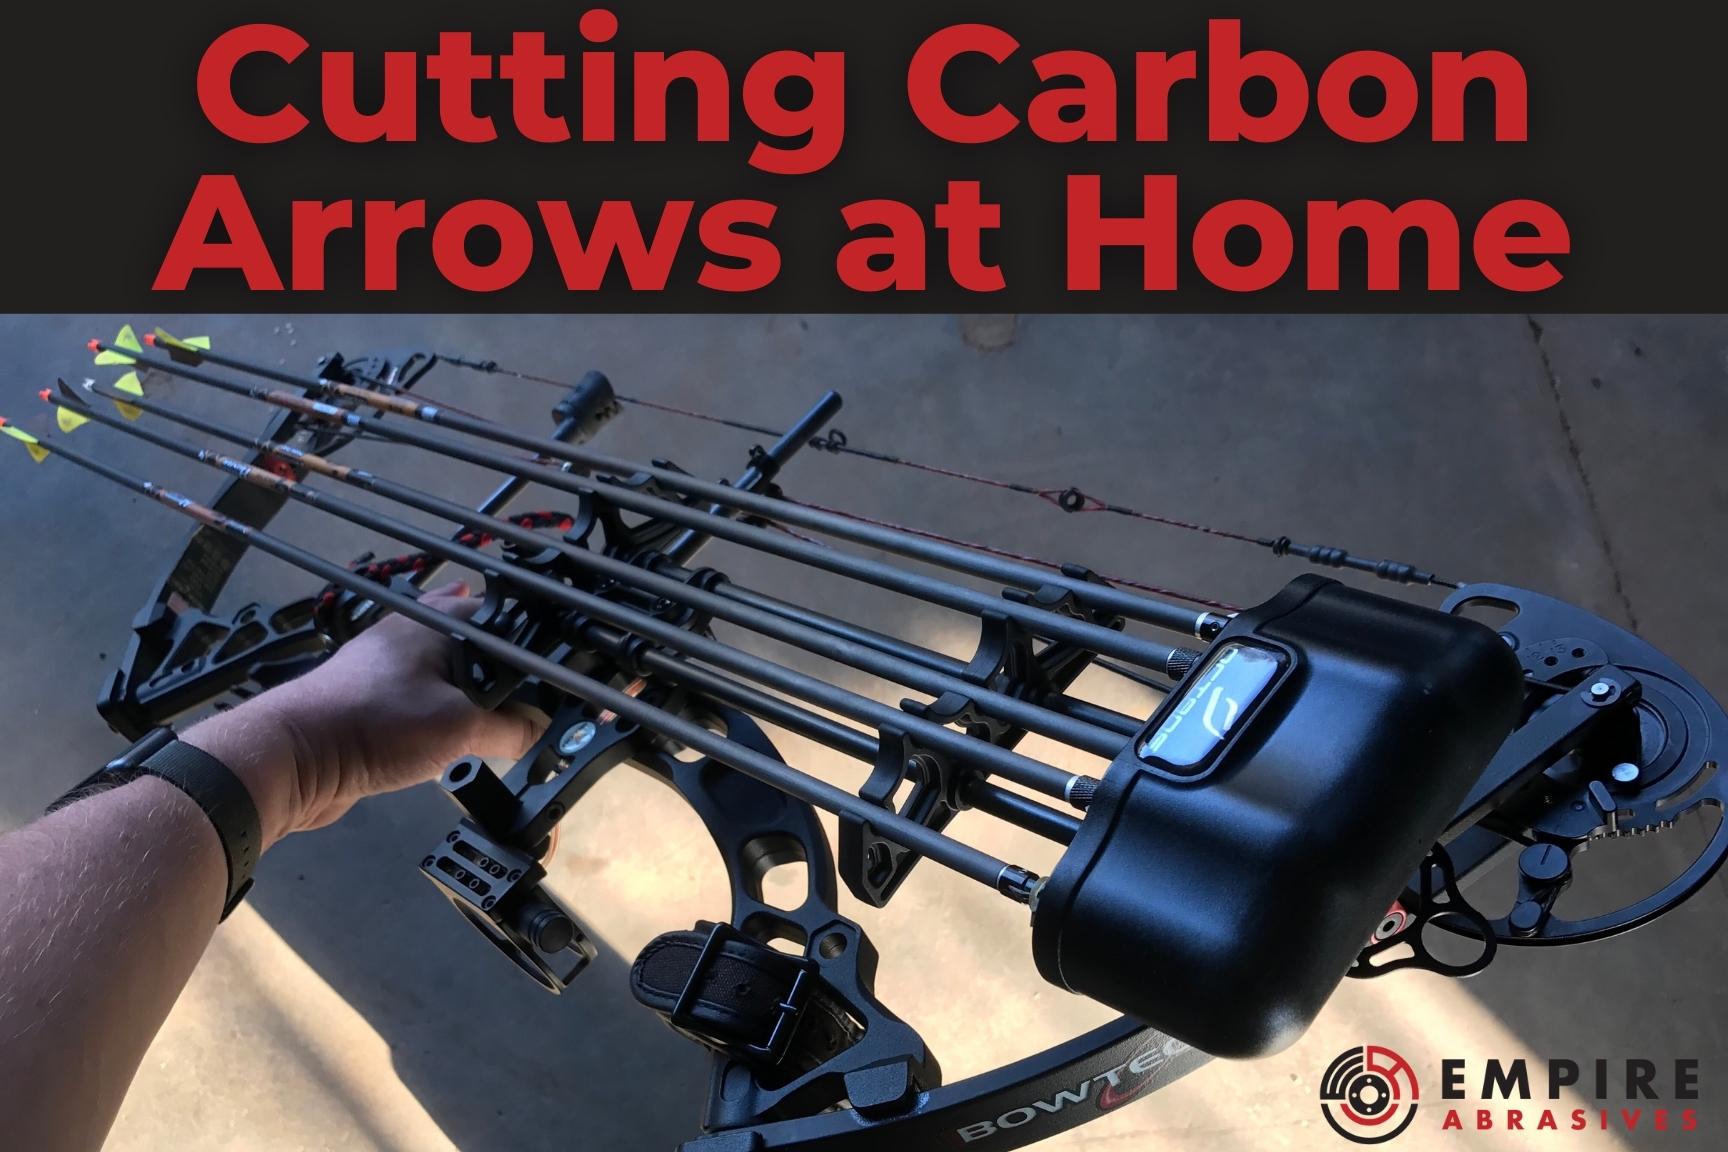 Cutting Carbon Arrows at Home